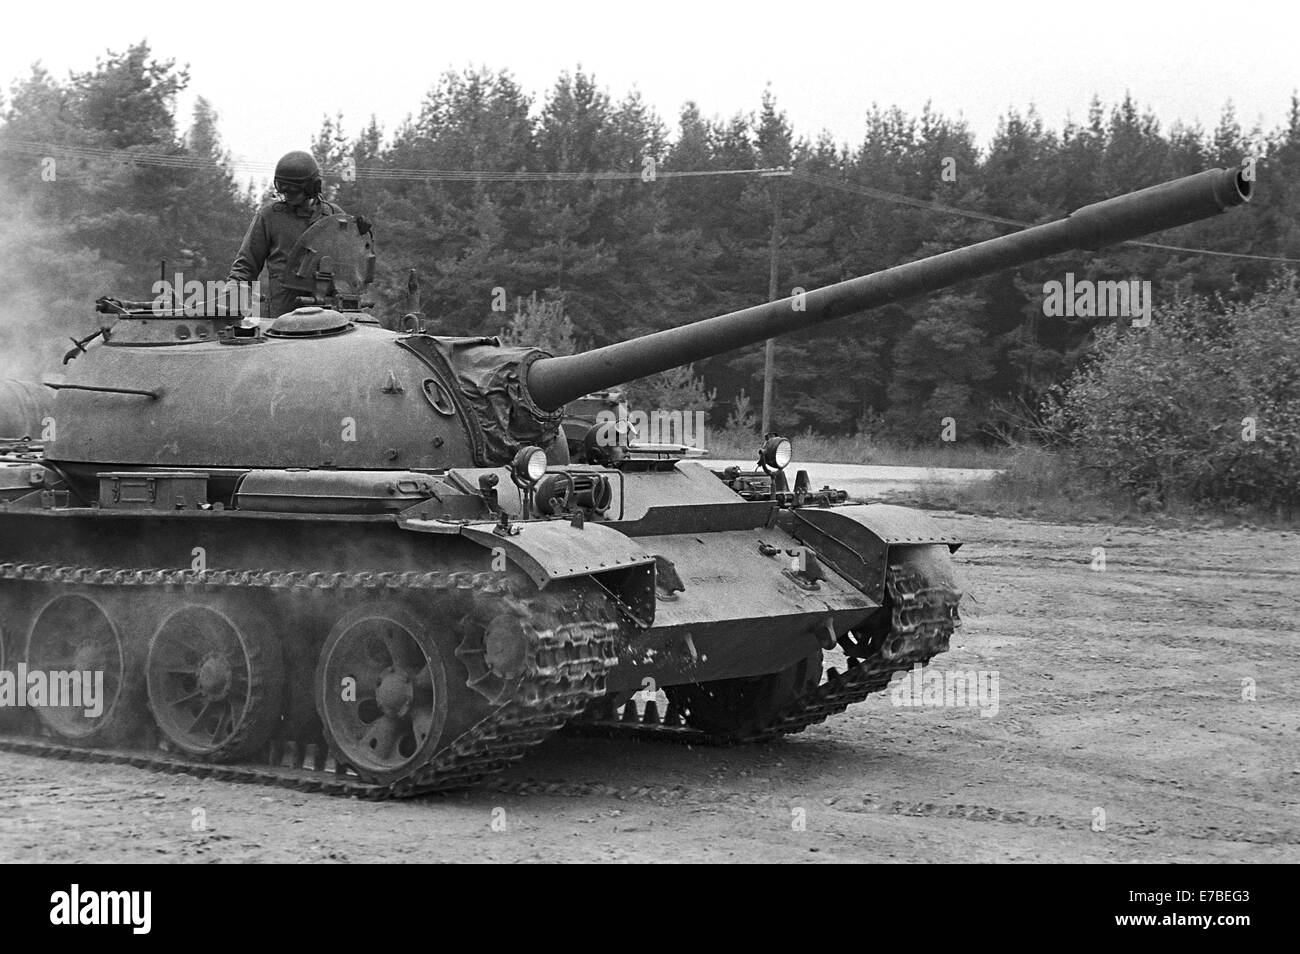 U.S.Army in Germany, Foreign Materials Training Detachment (FMTD) at Grafenwoehr training area, T 55 Soviet tank Stock Photo